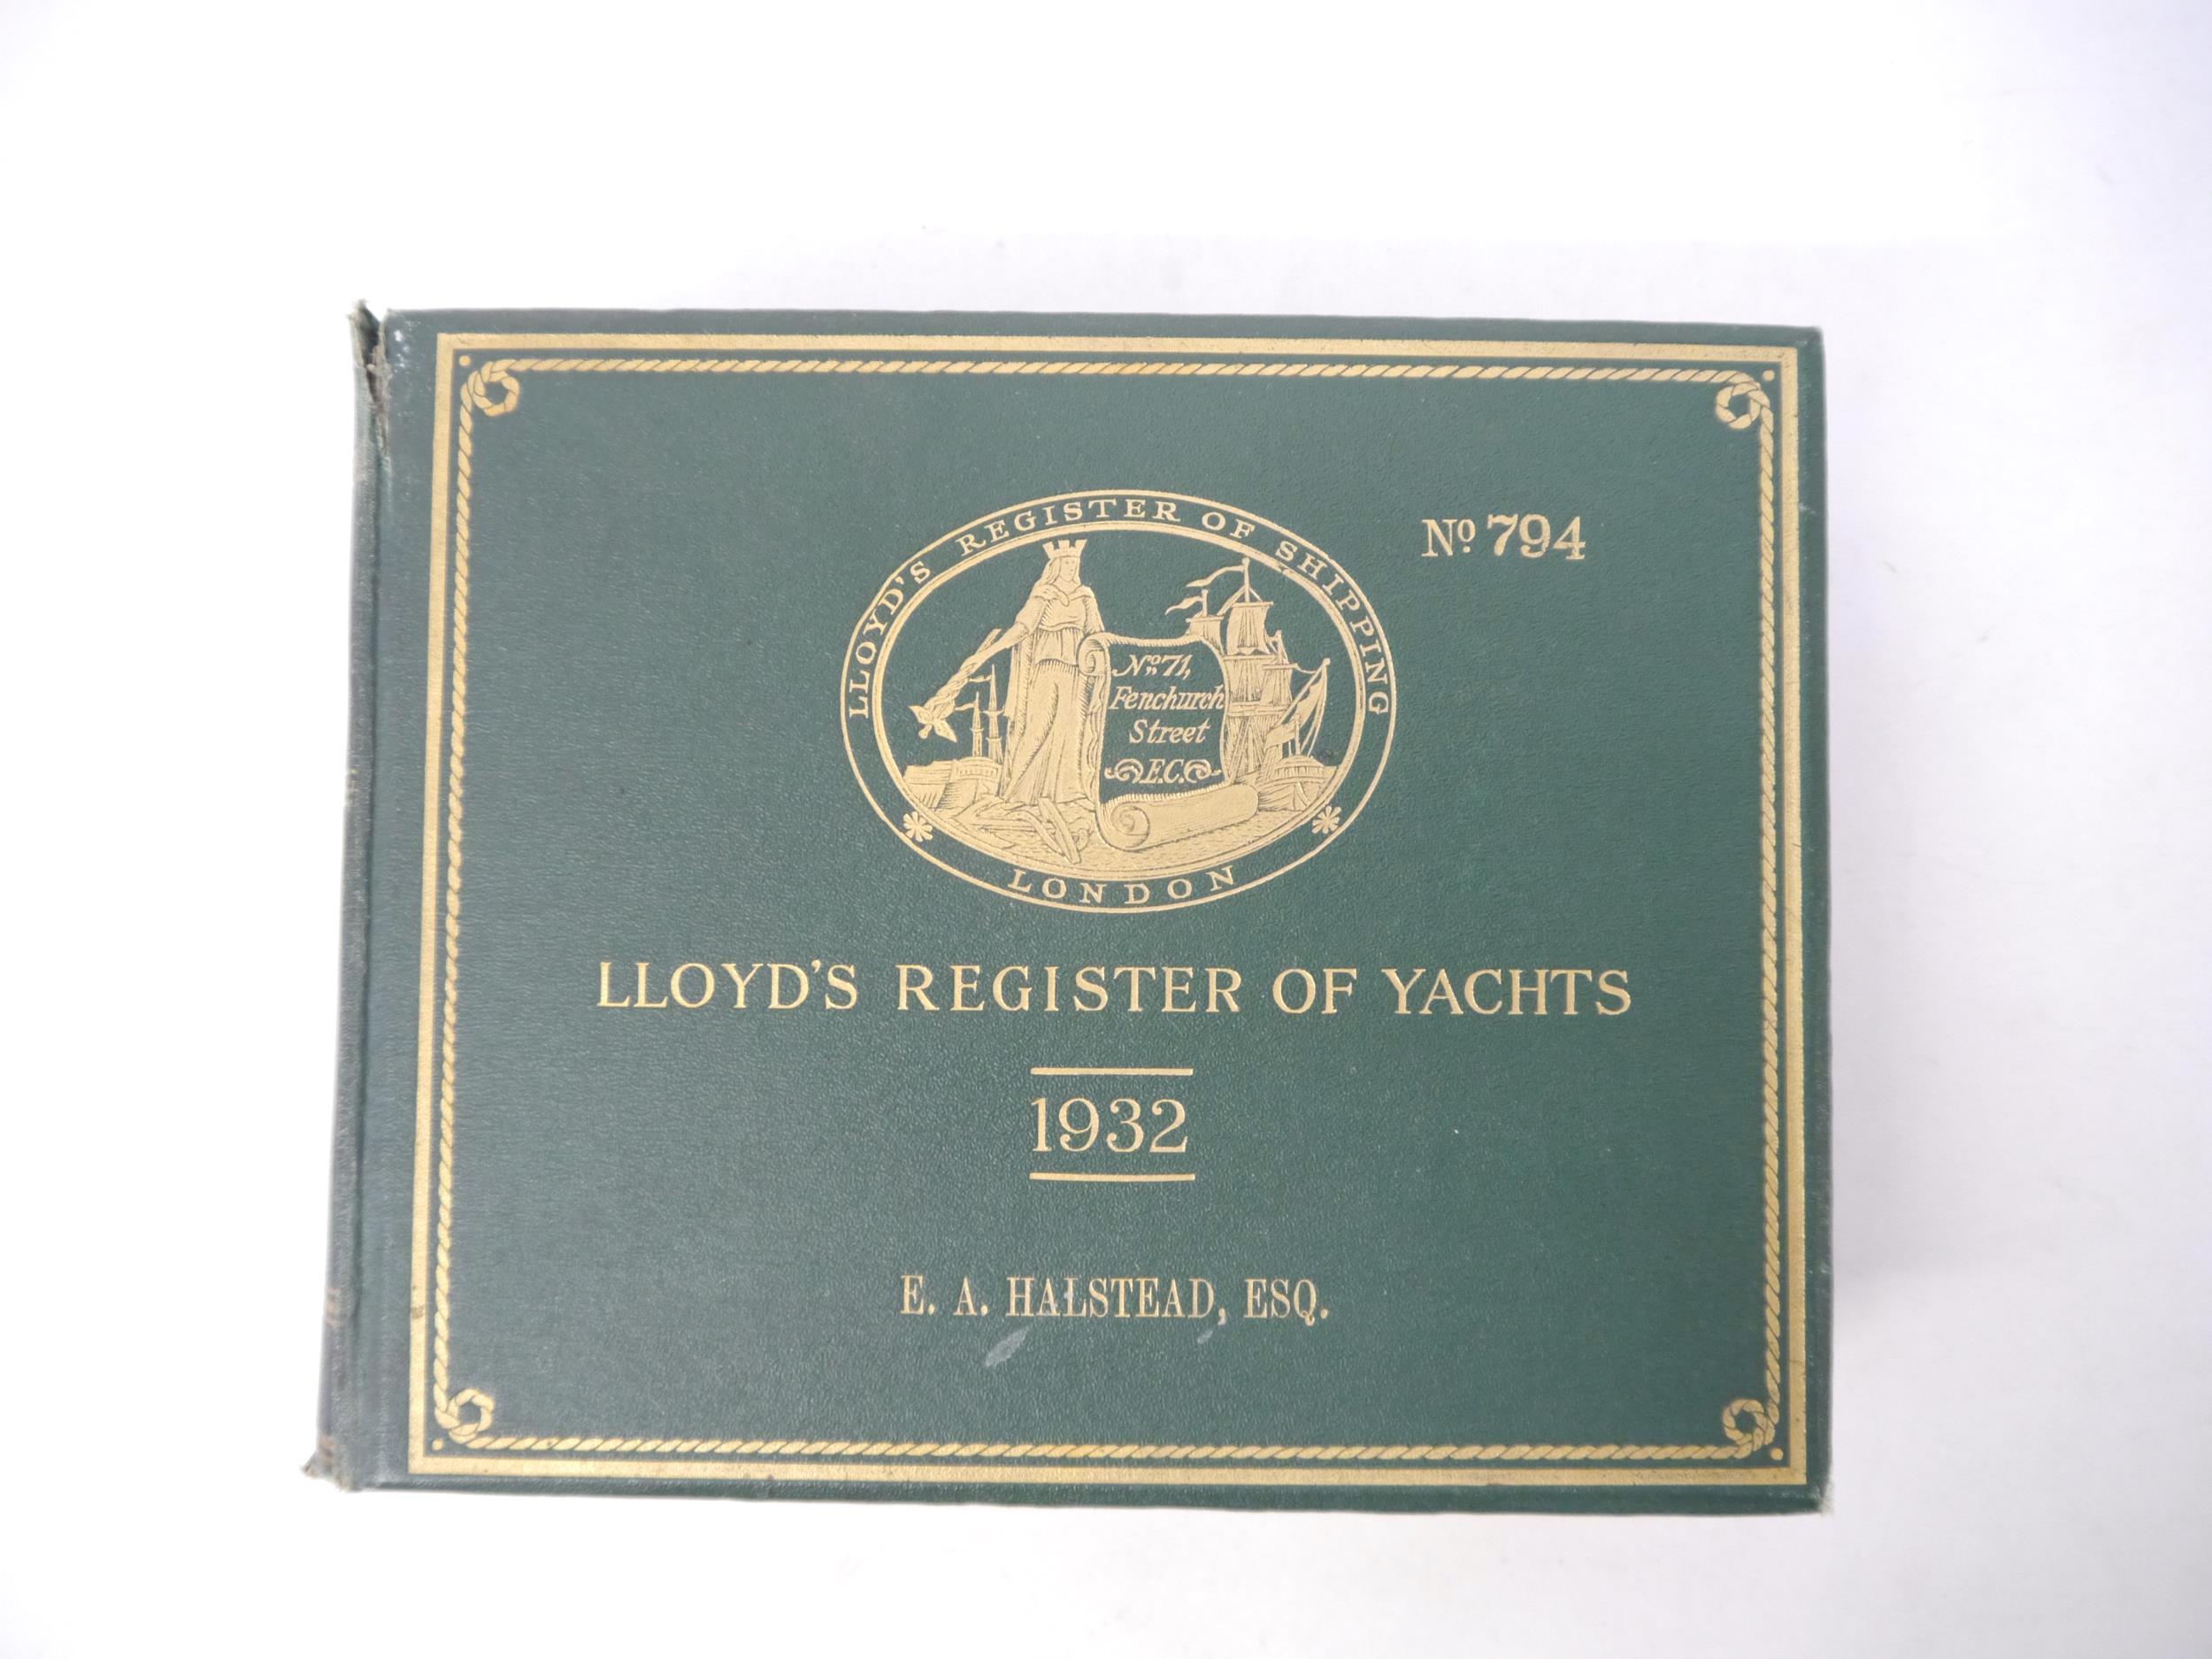 E.A. Halstead: 'Lloyd's Register of Yachts for the Year 1932', London, May 1932, 38 pages of